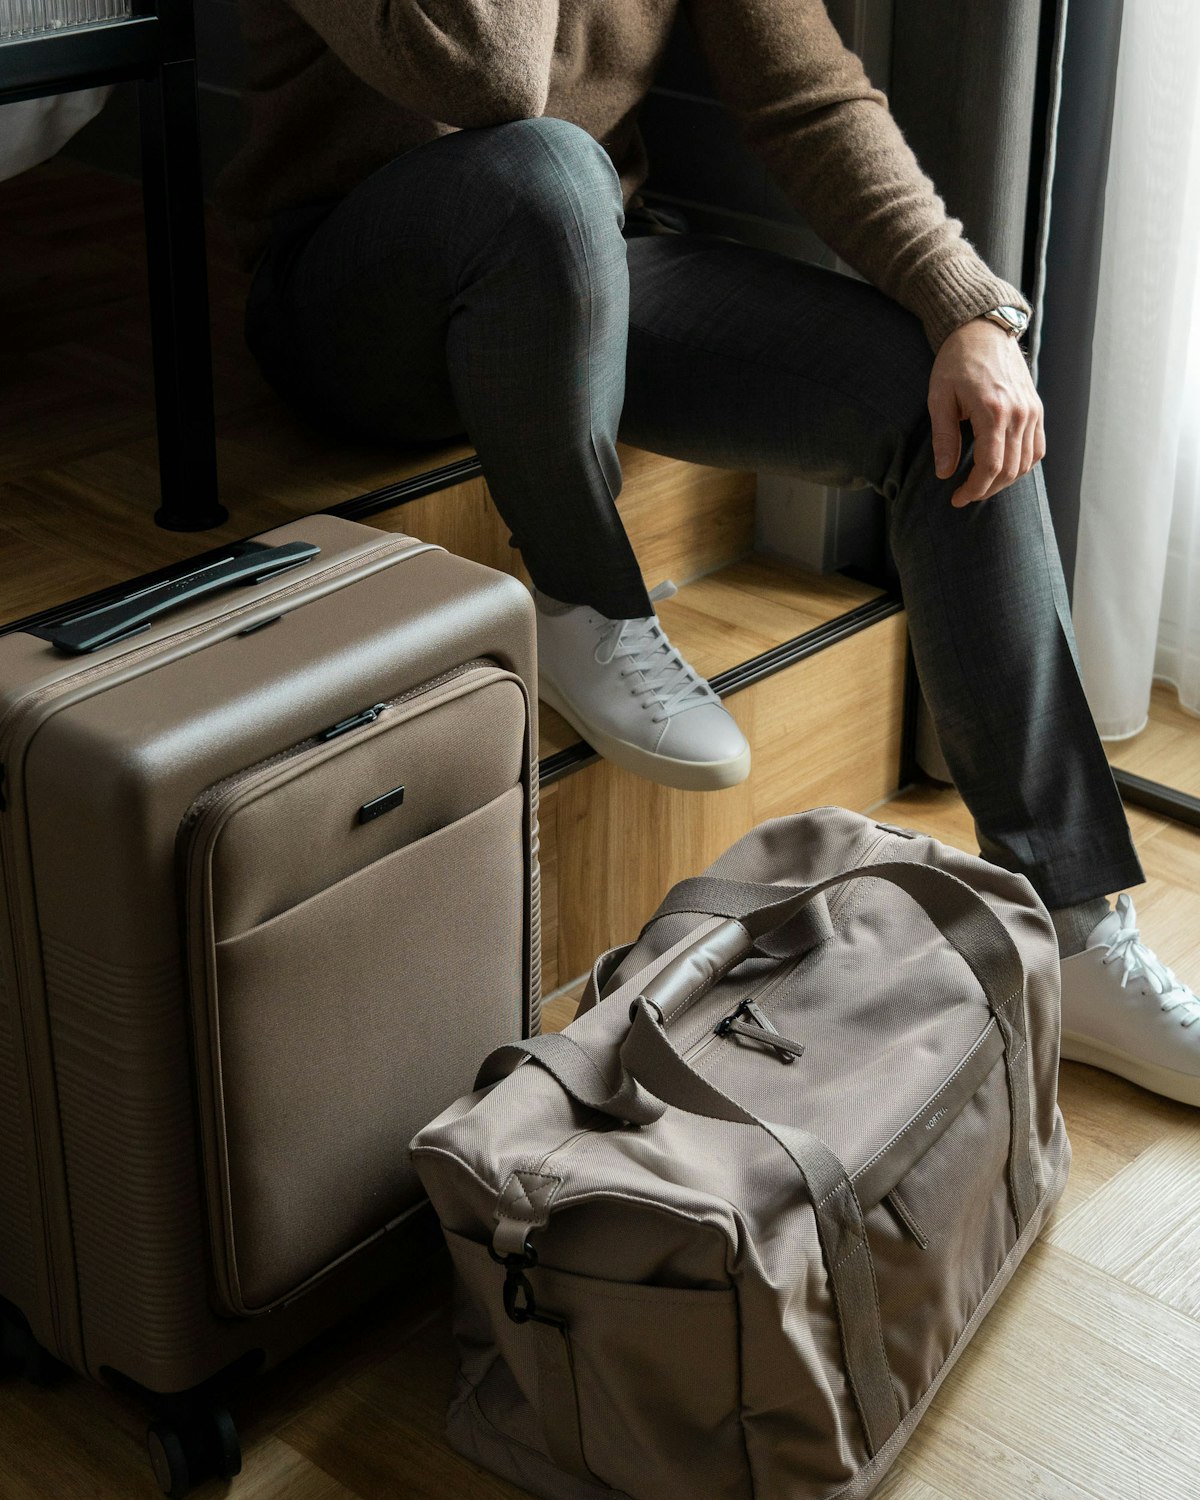 Nortvi Weekend Bag & Cabin suitcase Review: A Stylish and Durable Option for Modern Travelers